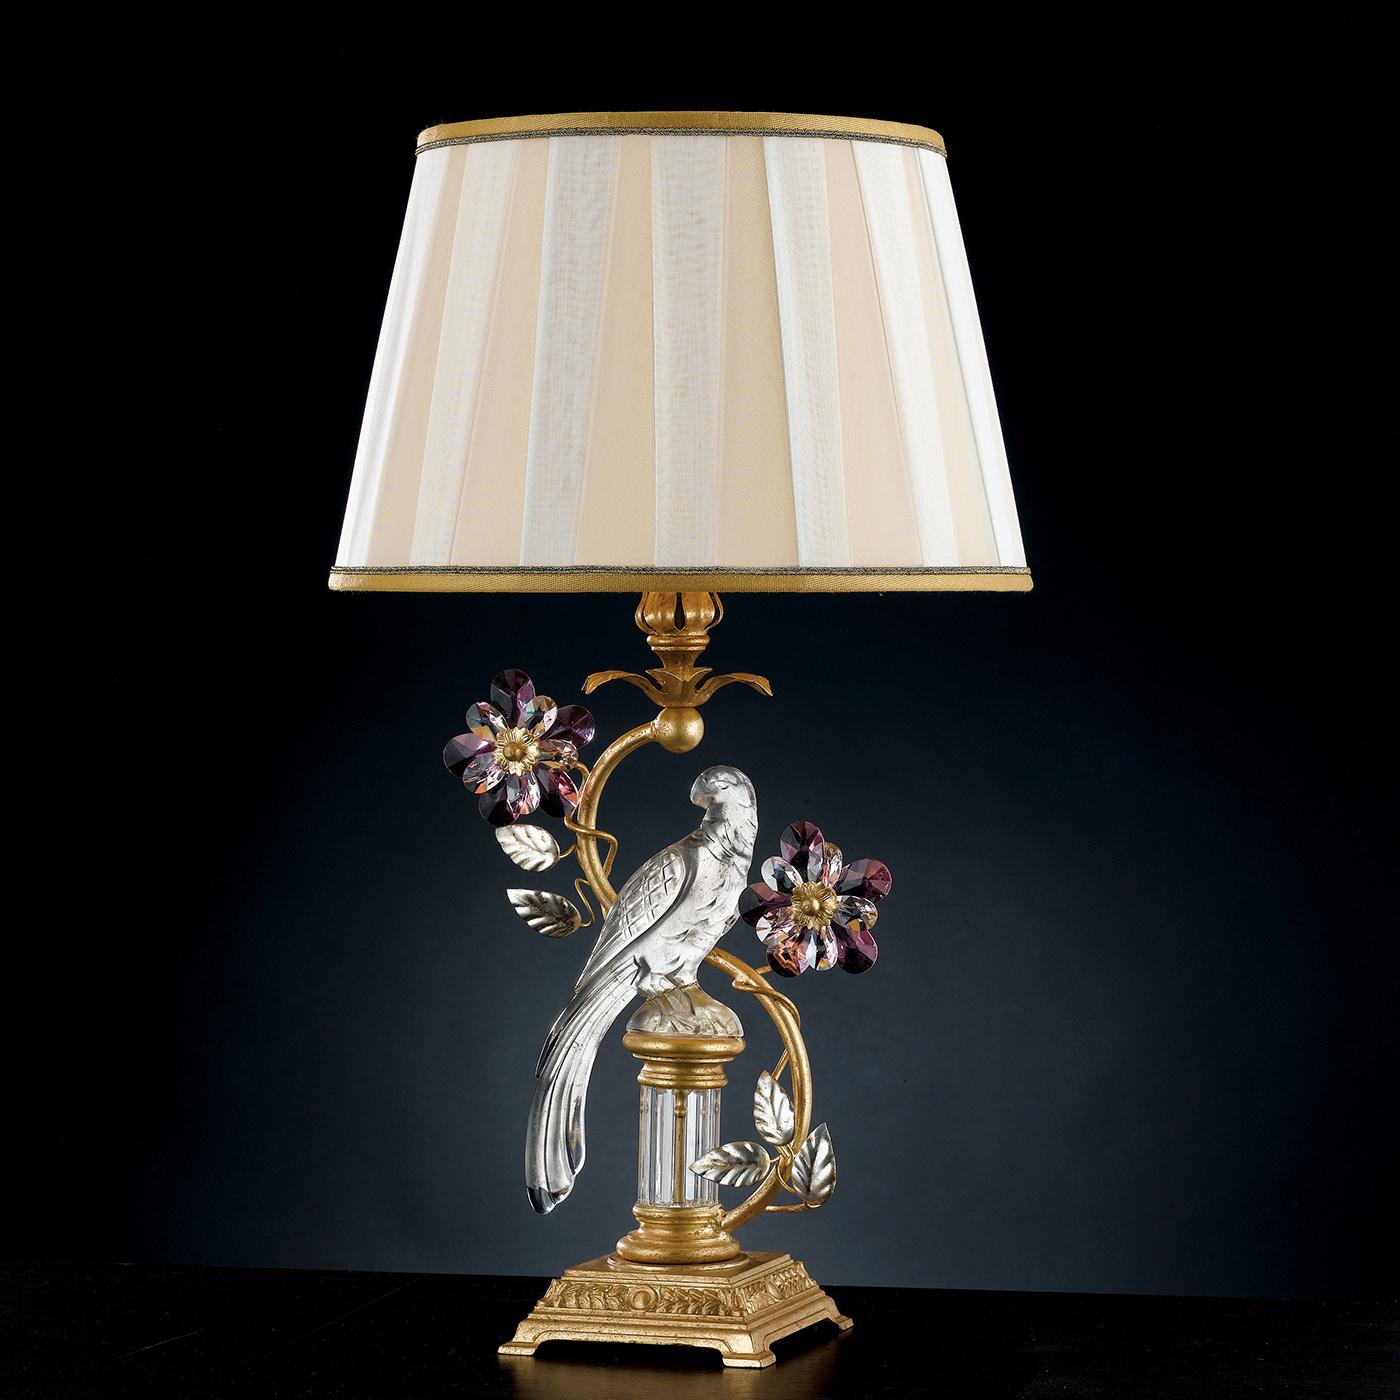 Inspired by centuries of style, this table lamp features an elegant bird in bold silver leaf. On a gold leaf base, the bird is framed with crystals and amethysts in floral compositions, creating a stand out style for traditional living rooms and